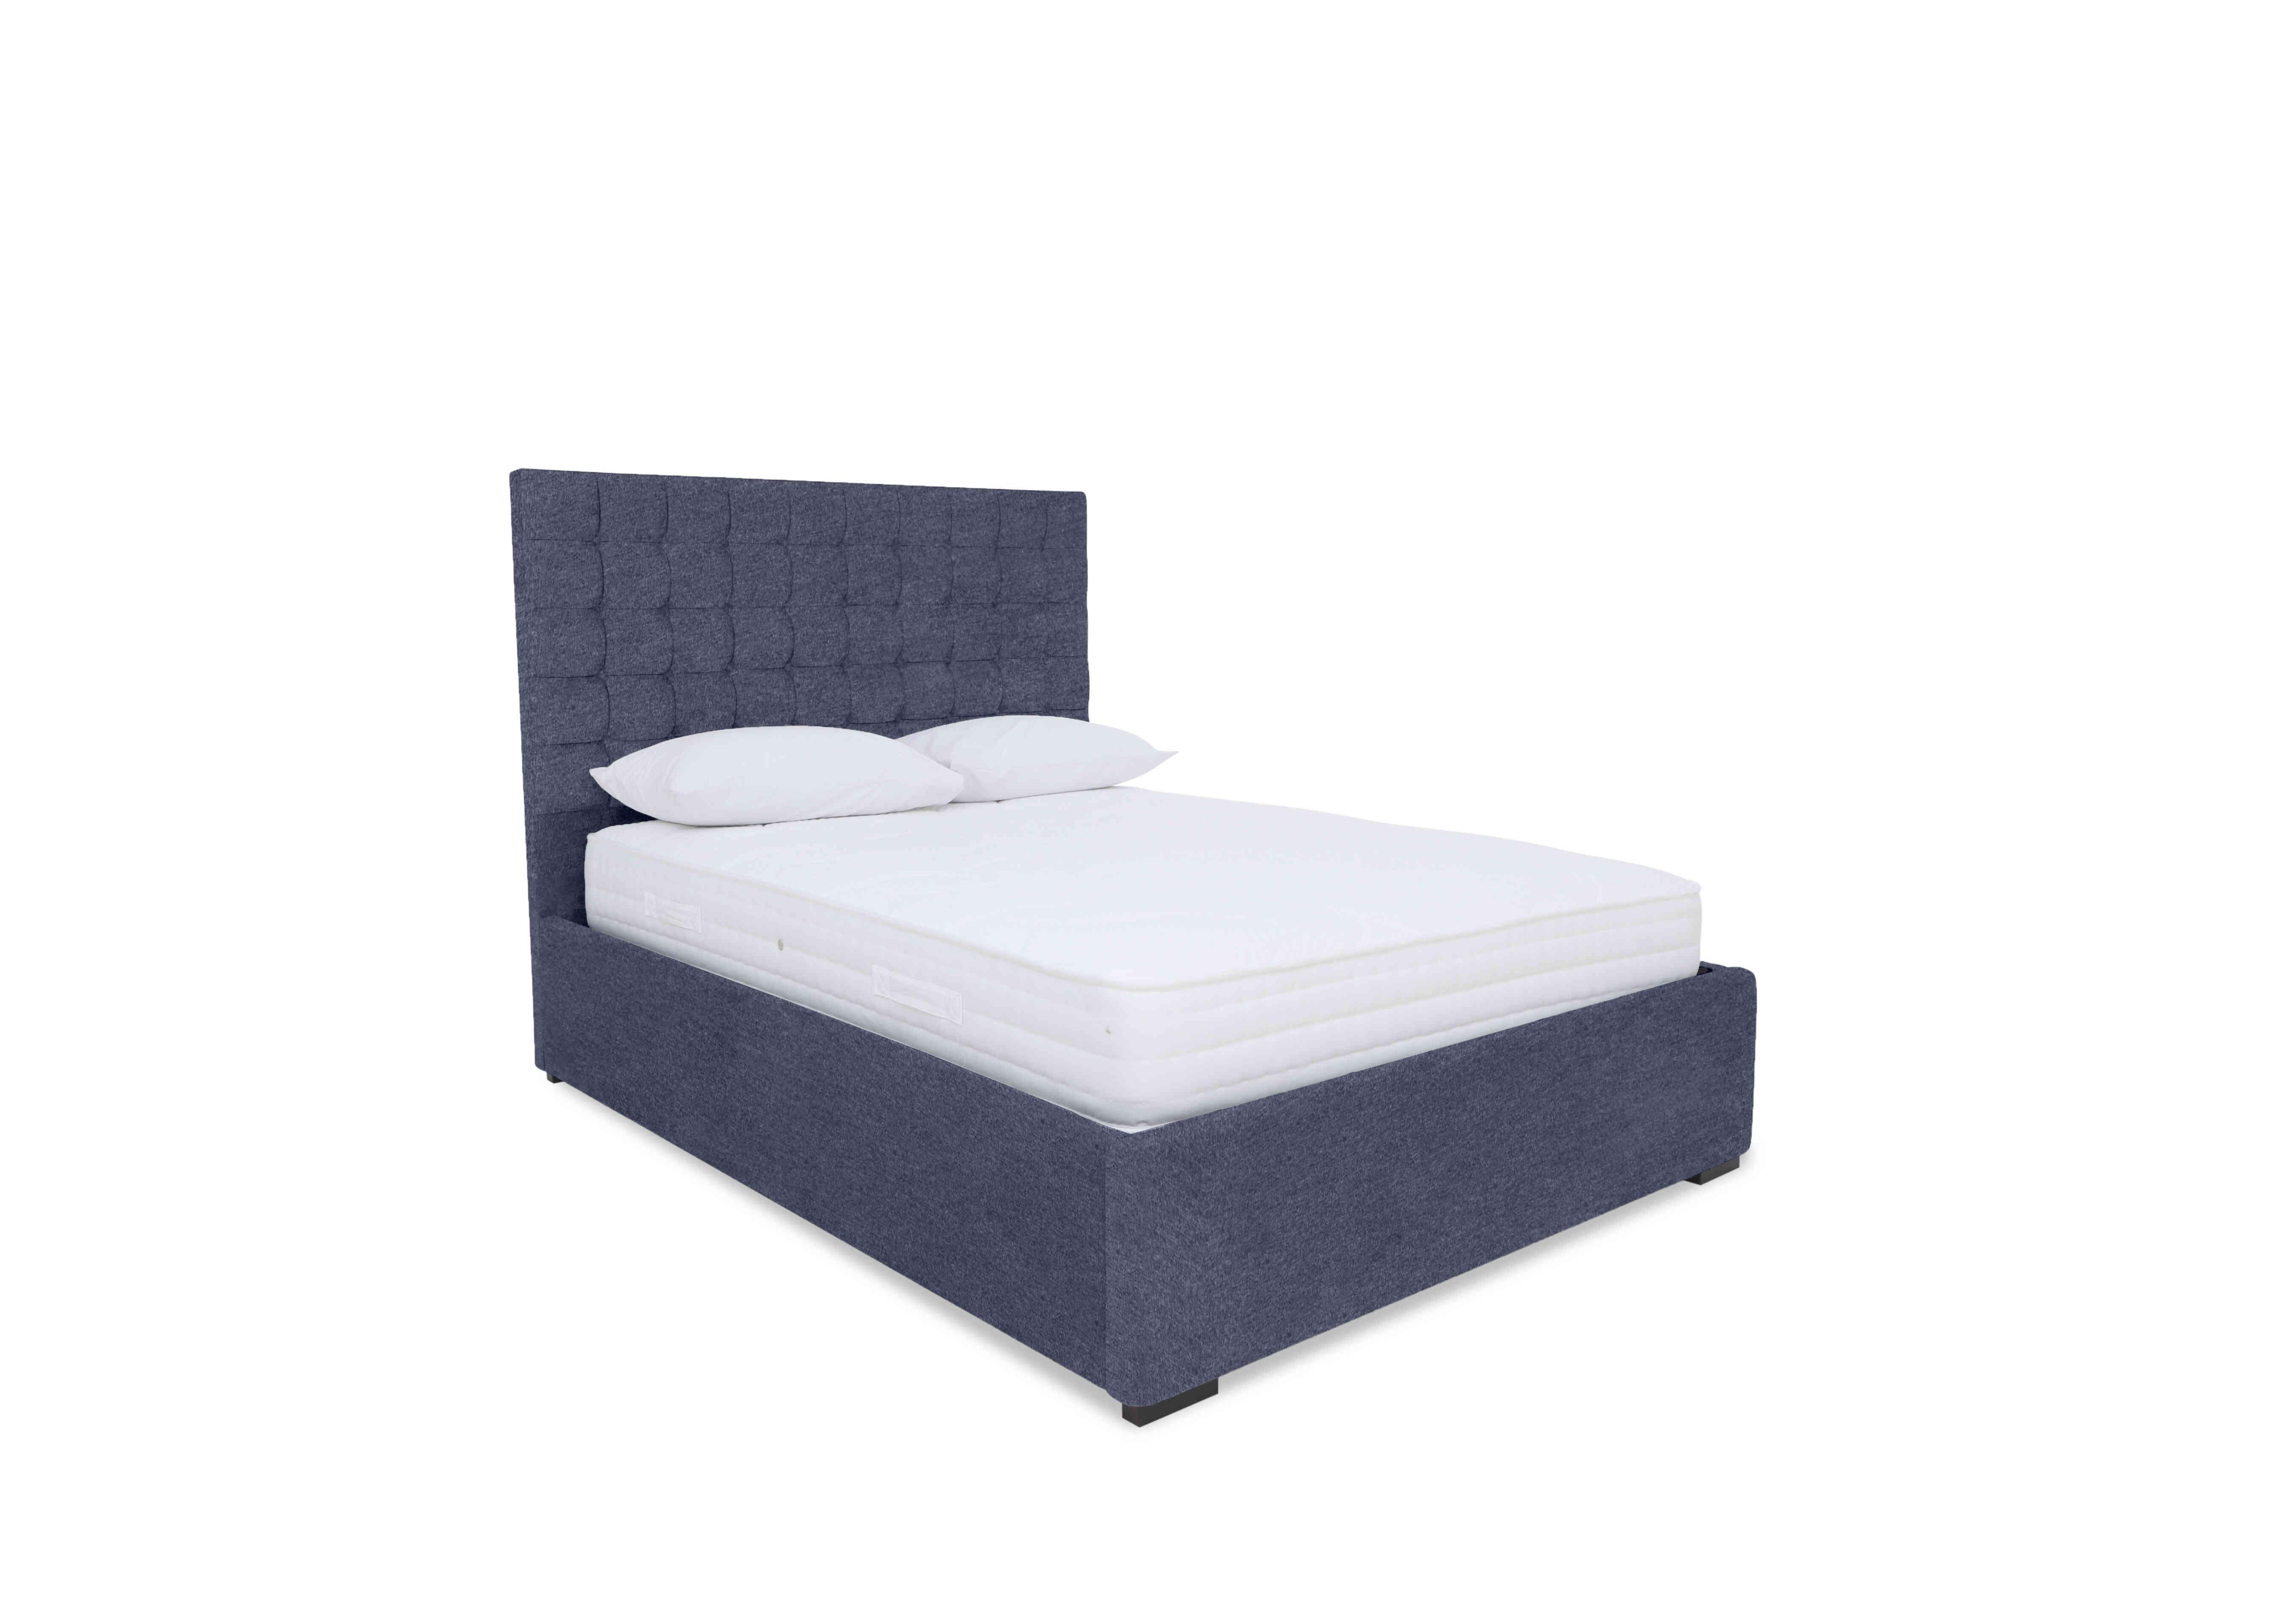 Dice Ottoman Bed Frame in Grace Marine on Furniture Village